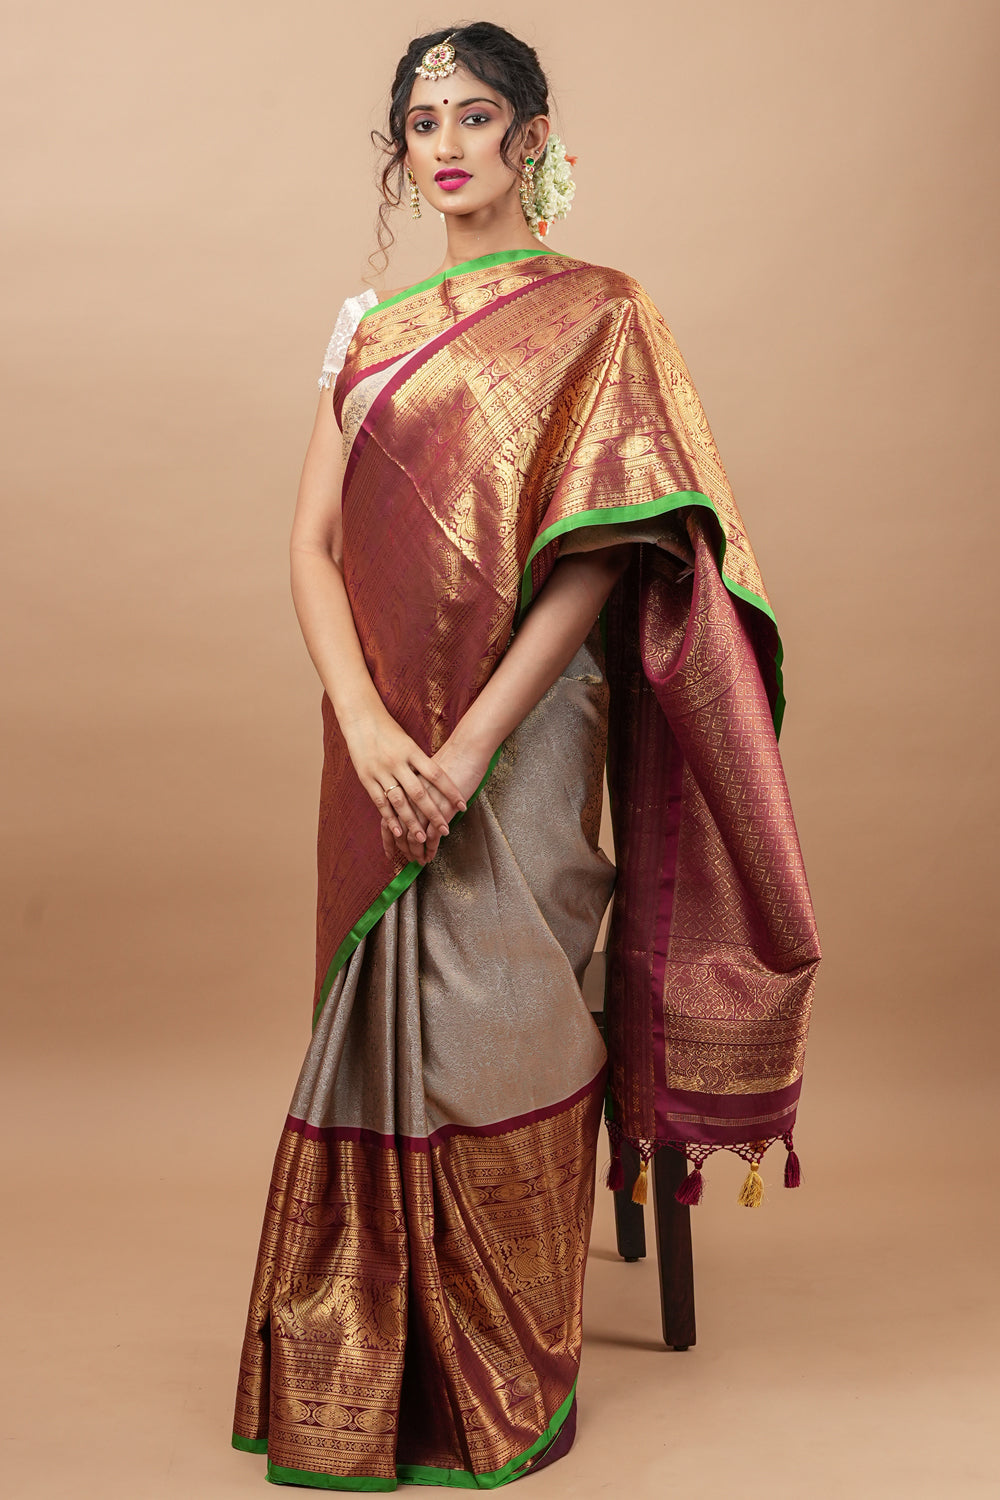 Gray Exquisite Brocade Gadwal Silk Saree with floral Jaal and extravagant 16 inch Zari border | SILK MARK CERTIFIED